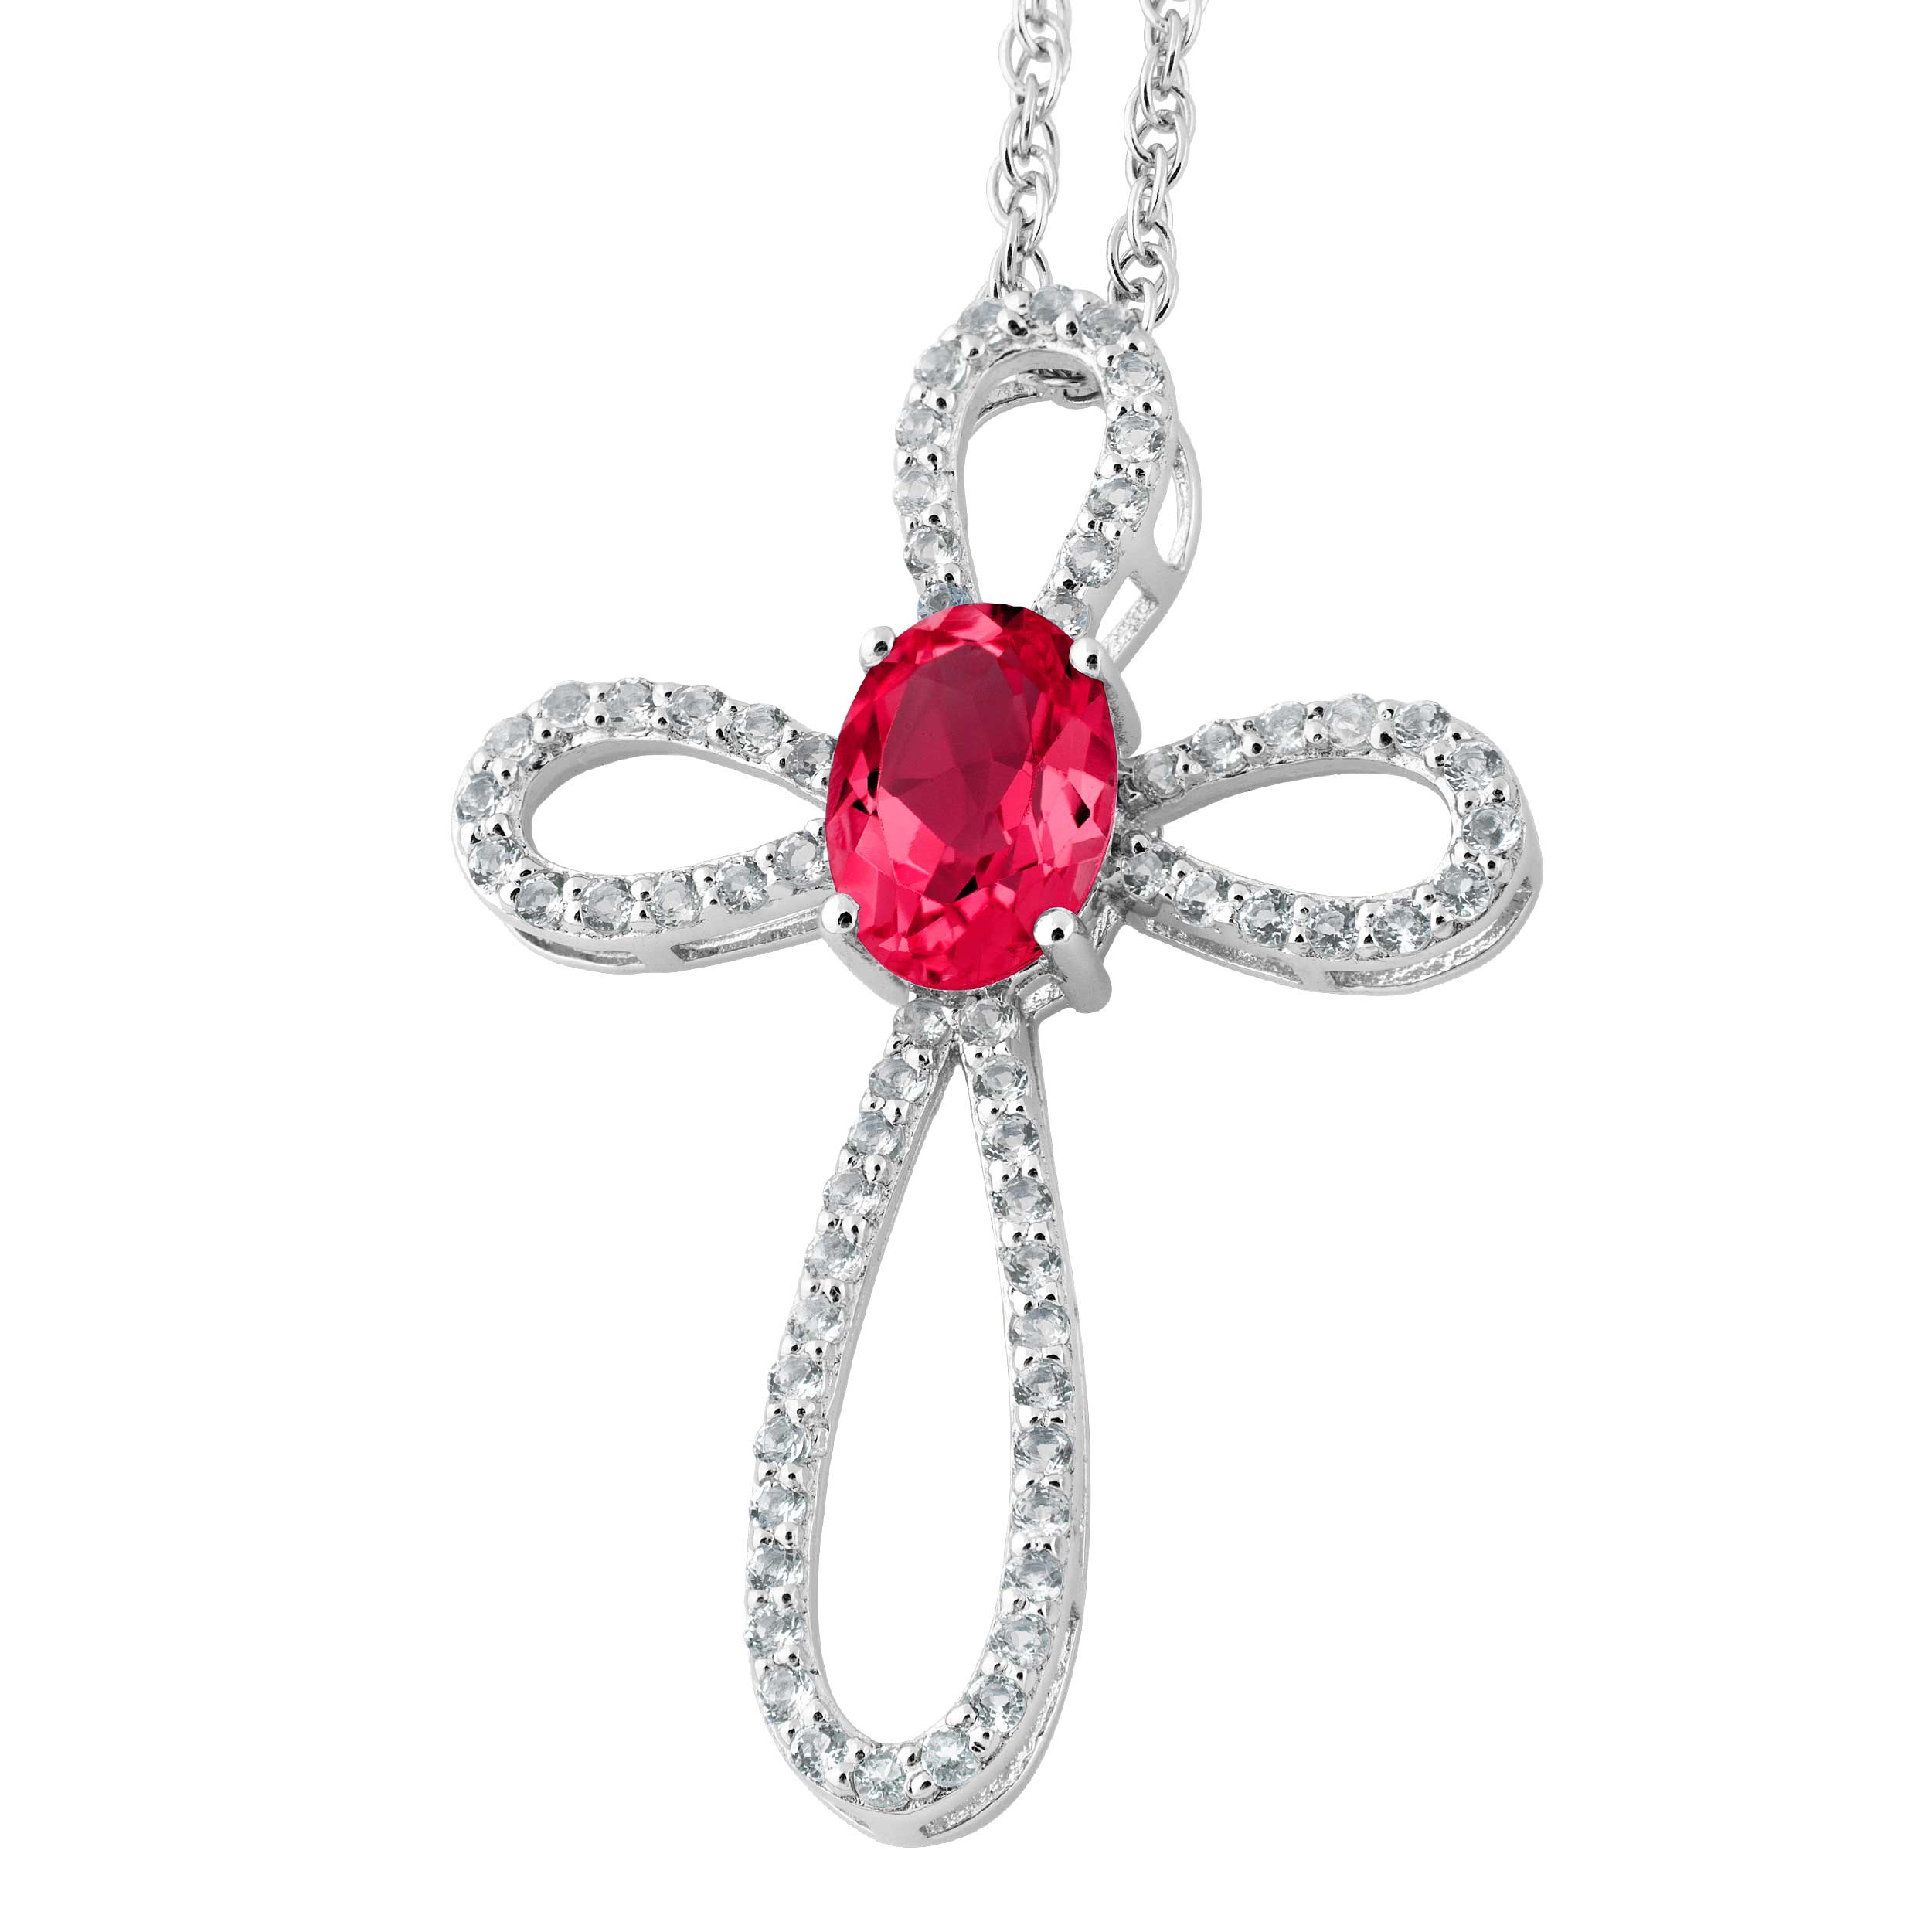 Oval Created Ruby and White Topaz Cross Pendant Necklace, Rhodium Plated Sterling Silver